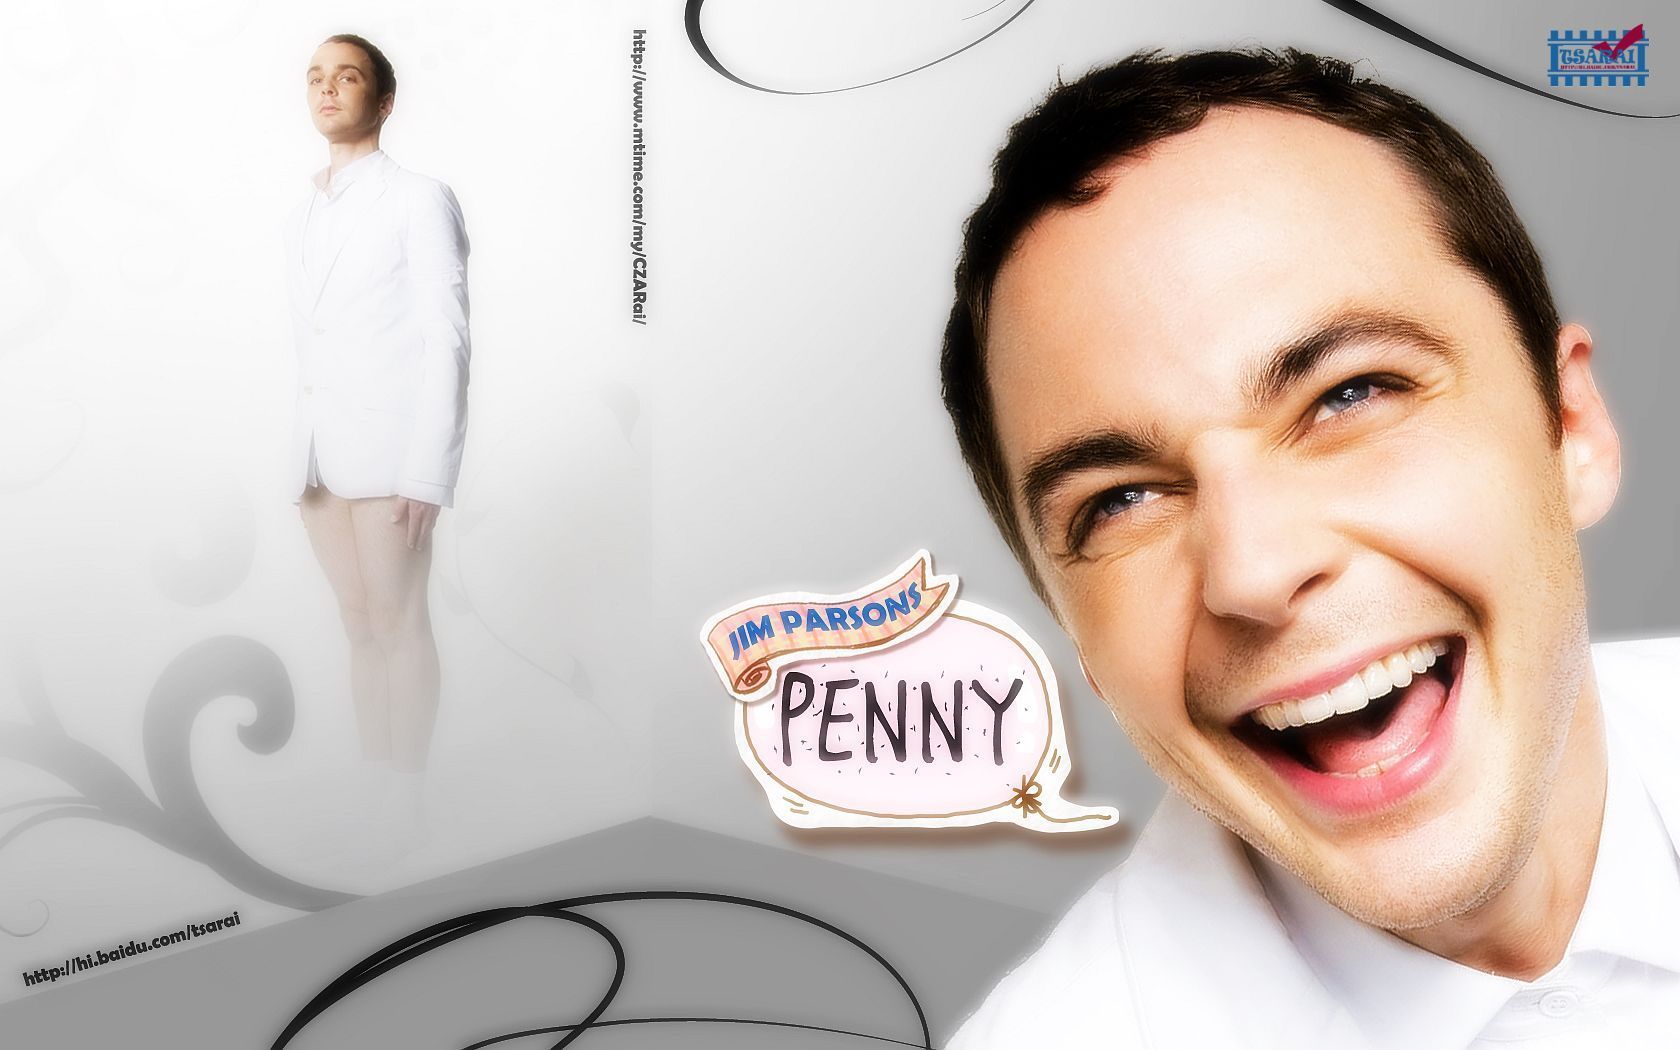 Jim Parsons Image Aaaa Penny HD Wallpaper And Background Photos